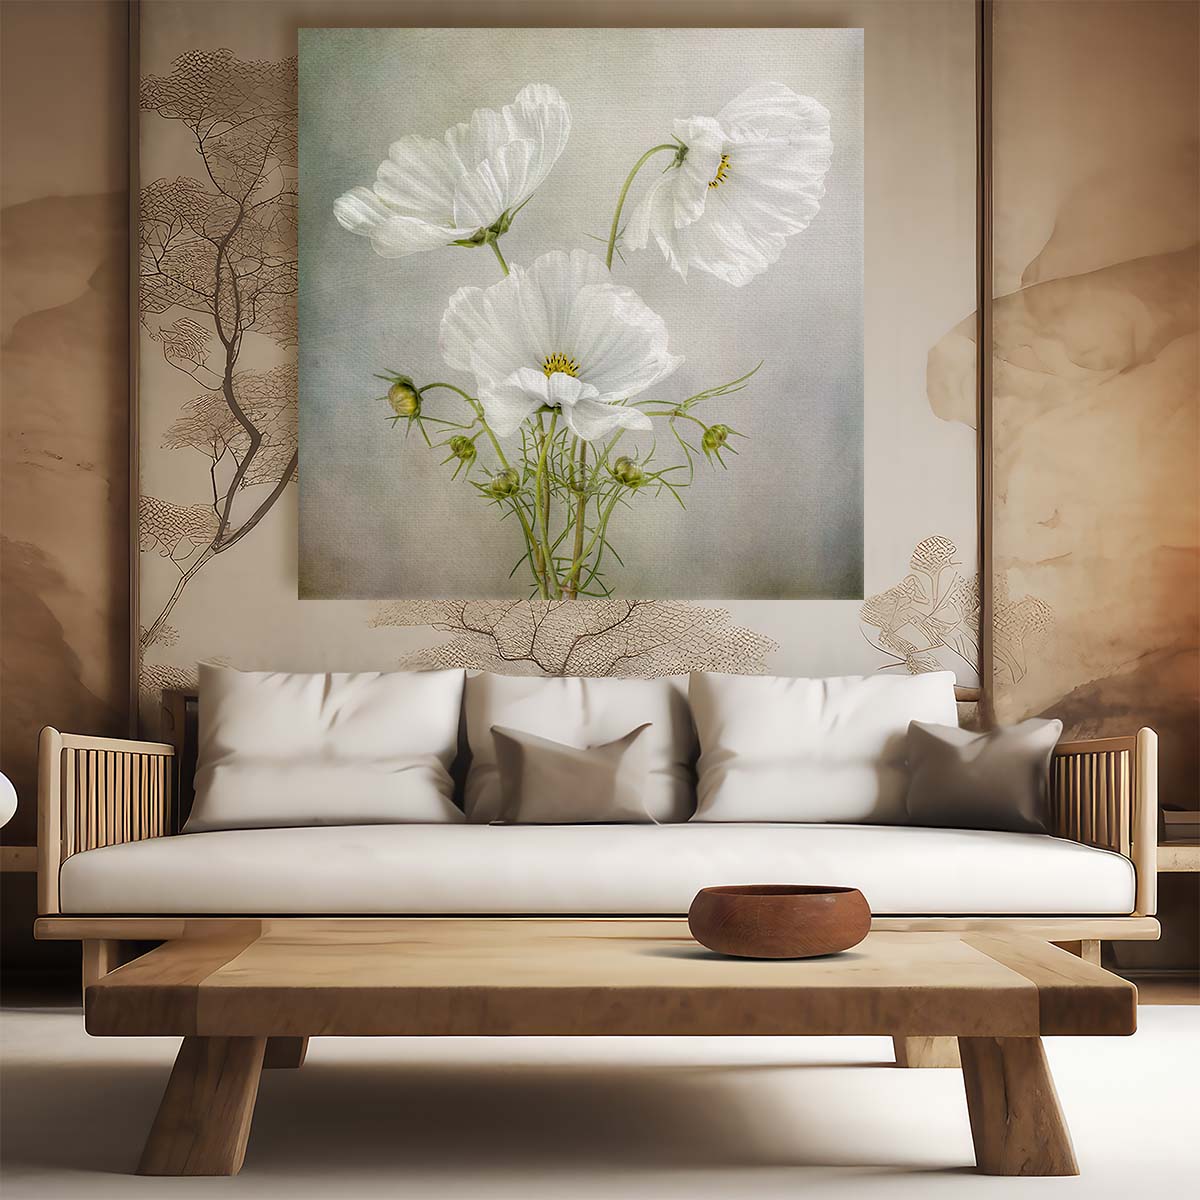 Retro Cosmos Trio Vintage Floral Photography Wall Art by Luxuriance Designs. Made in USA.